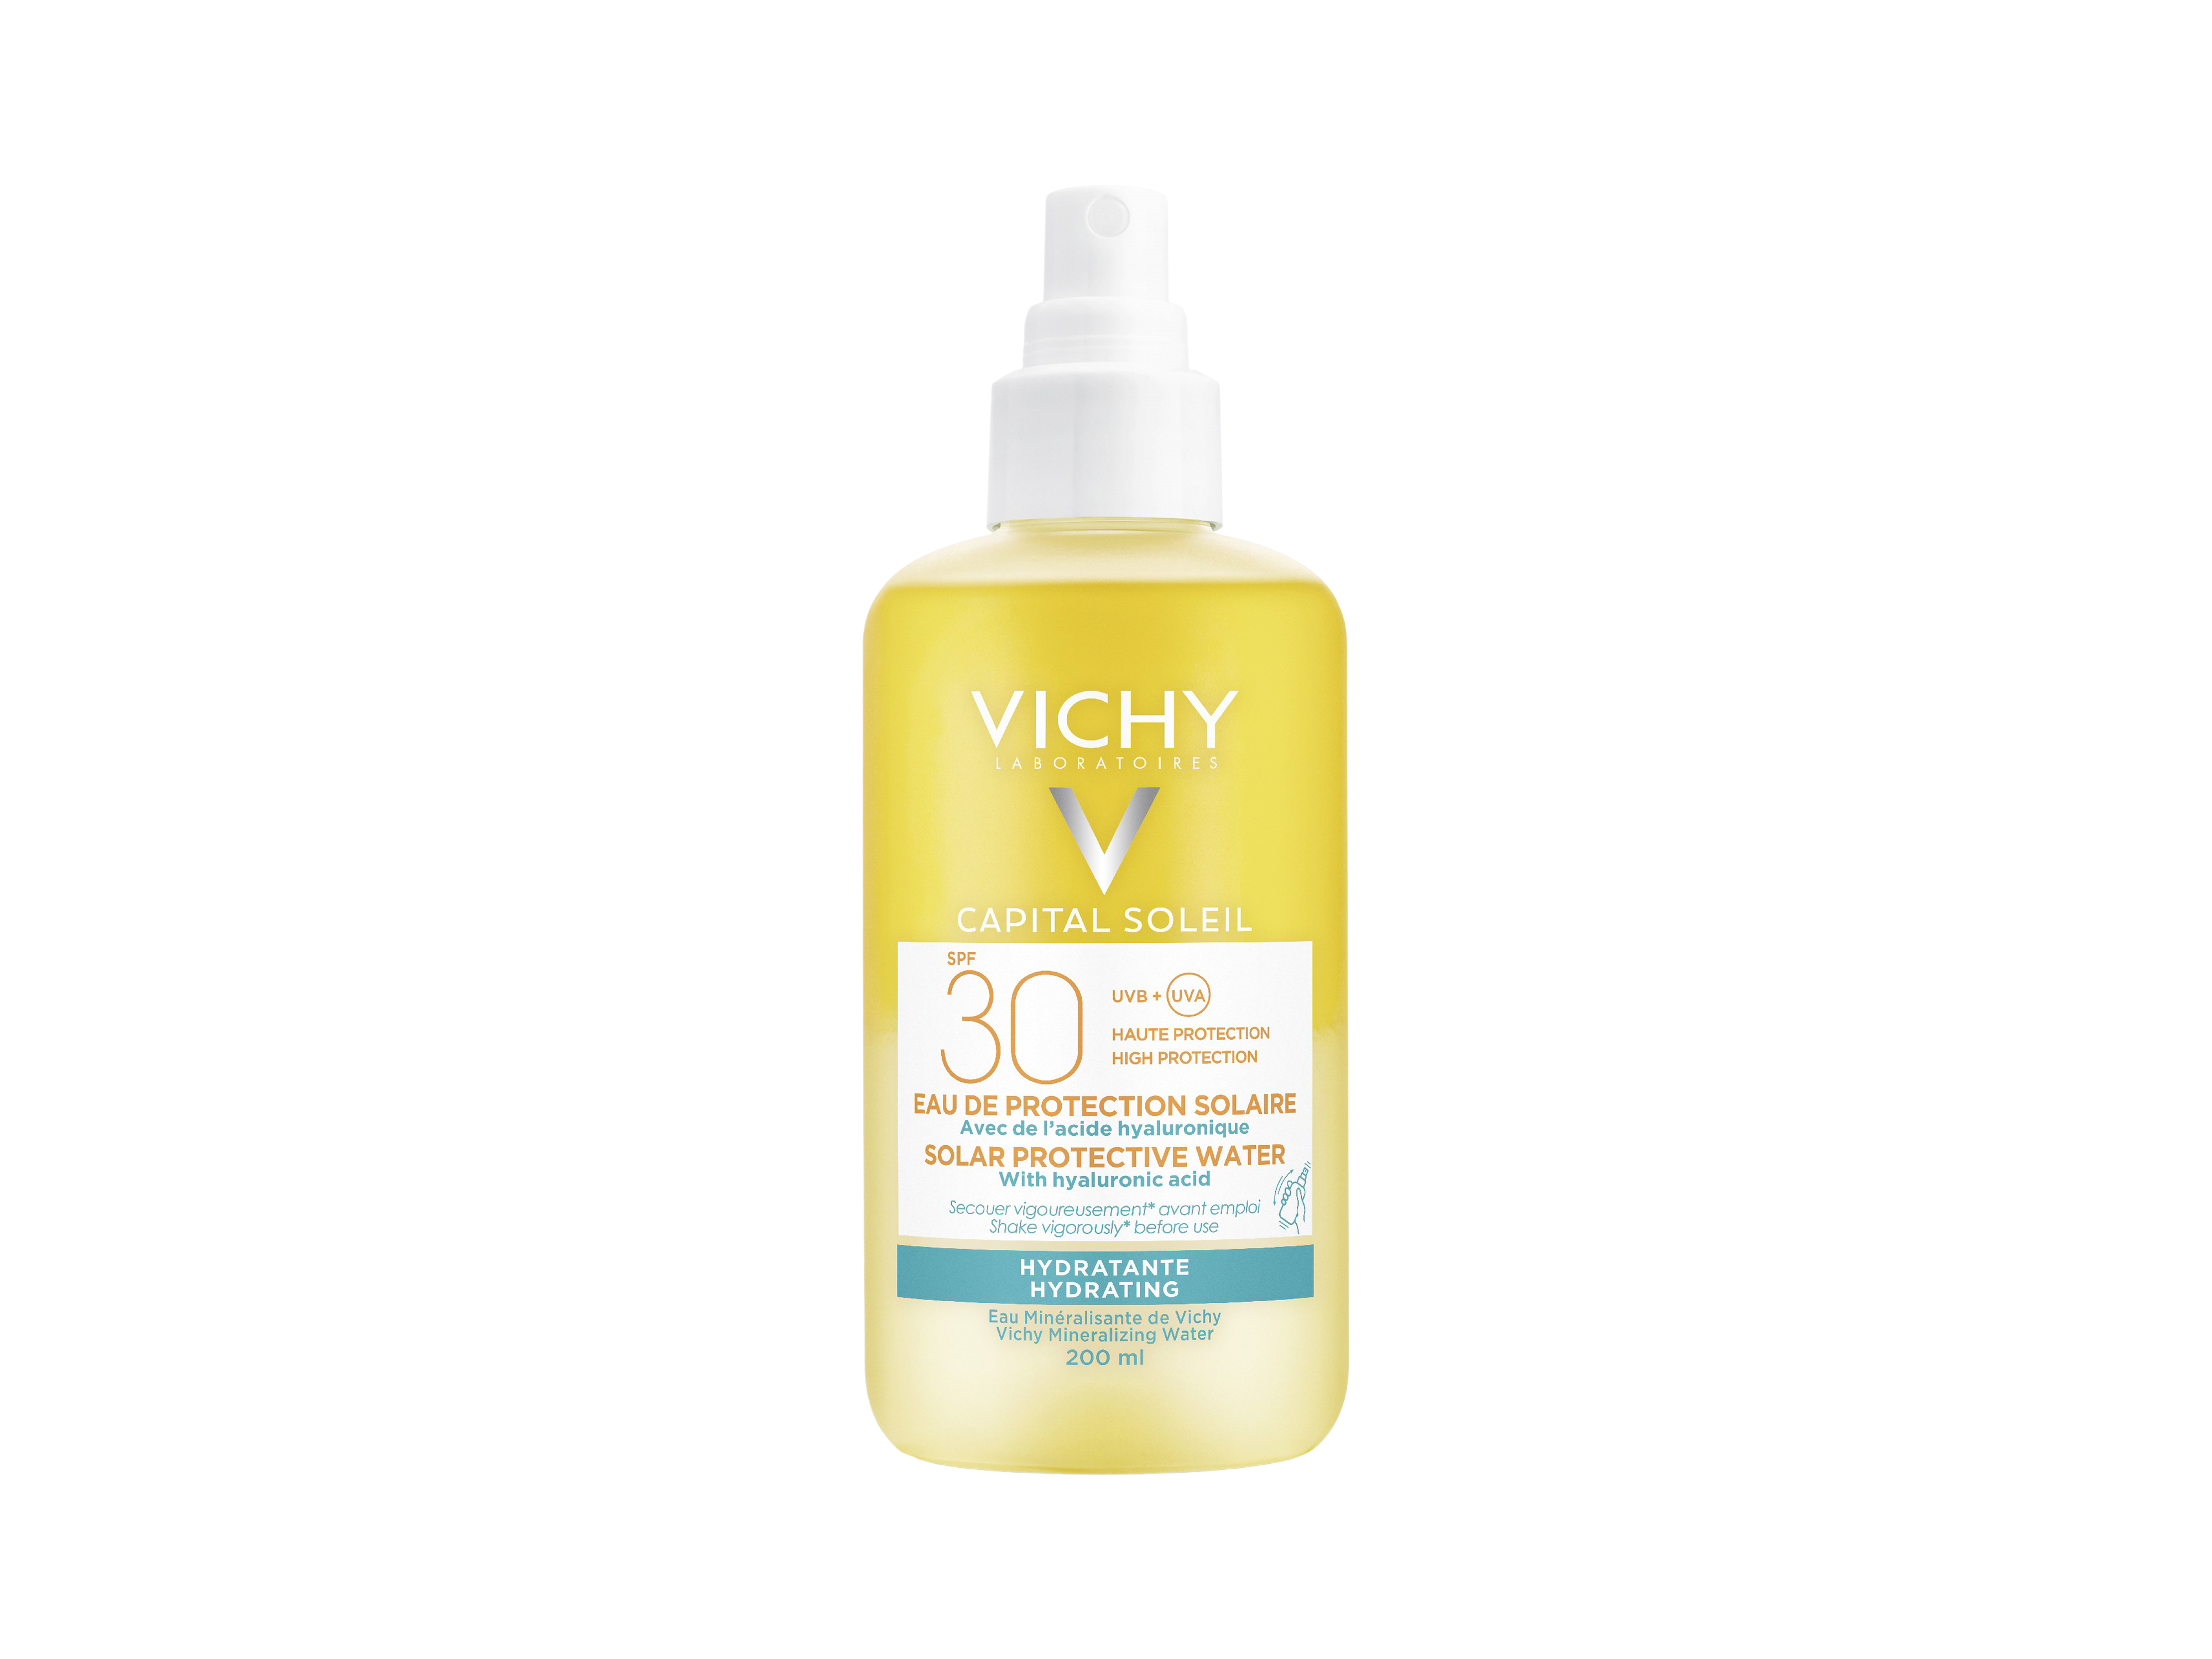 Vichy Capital Soleil Hydrating Protective Water, SPF 30, 200 ml